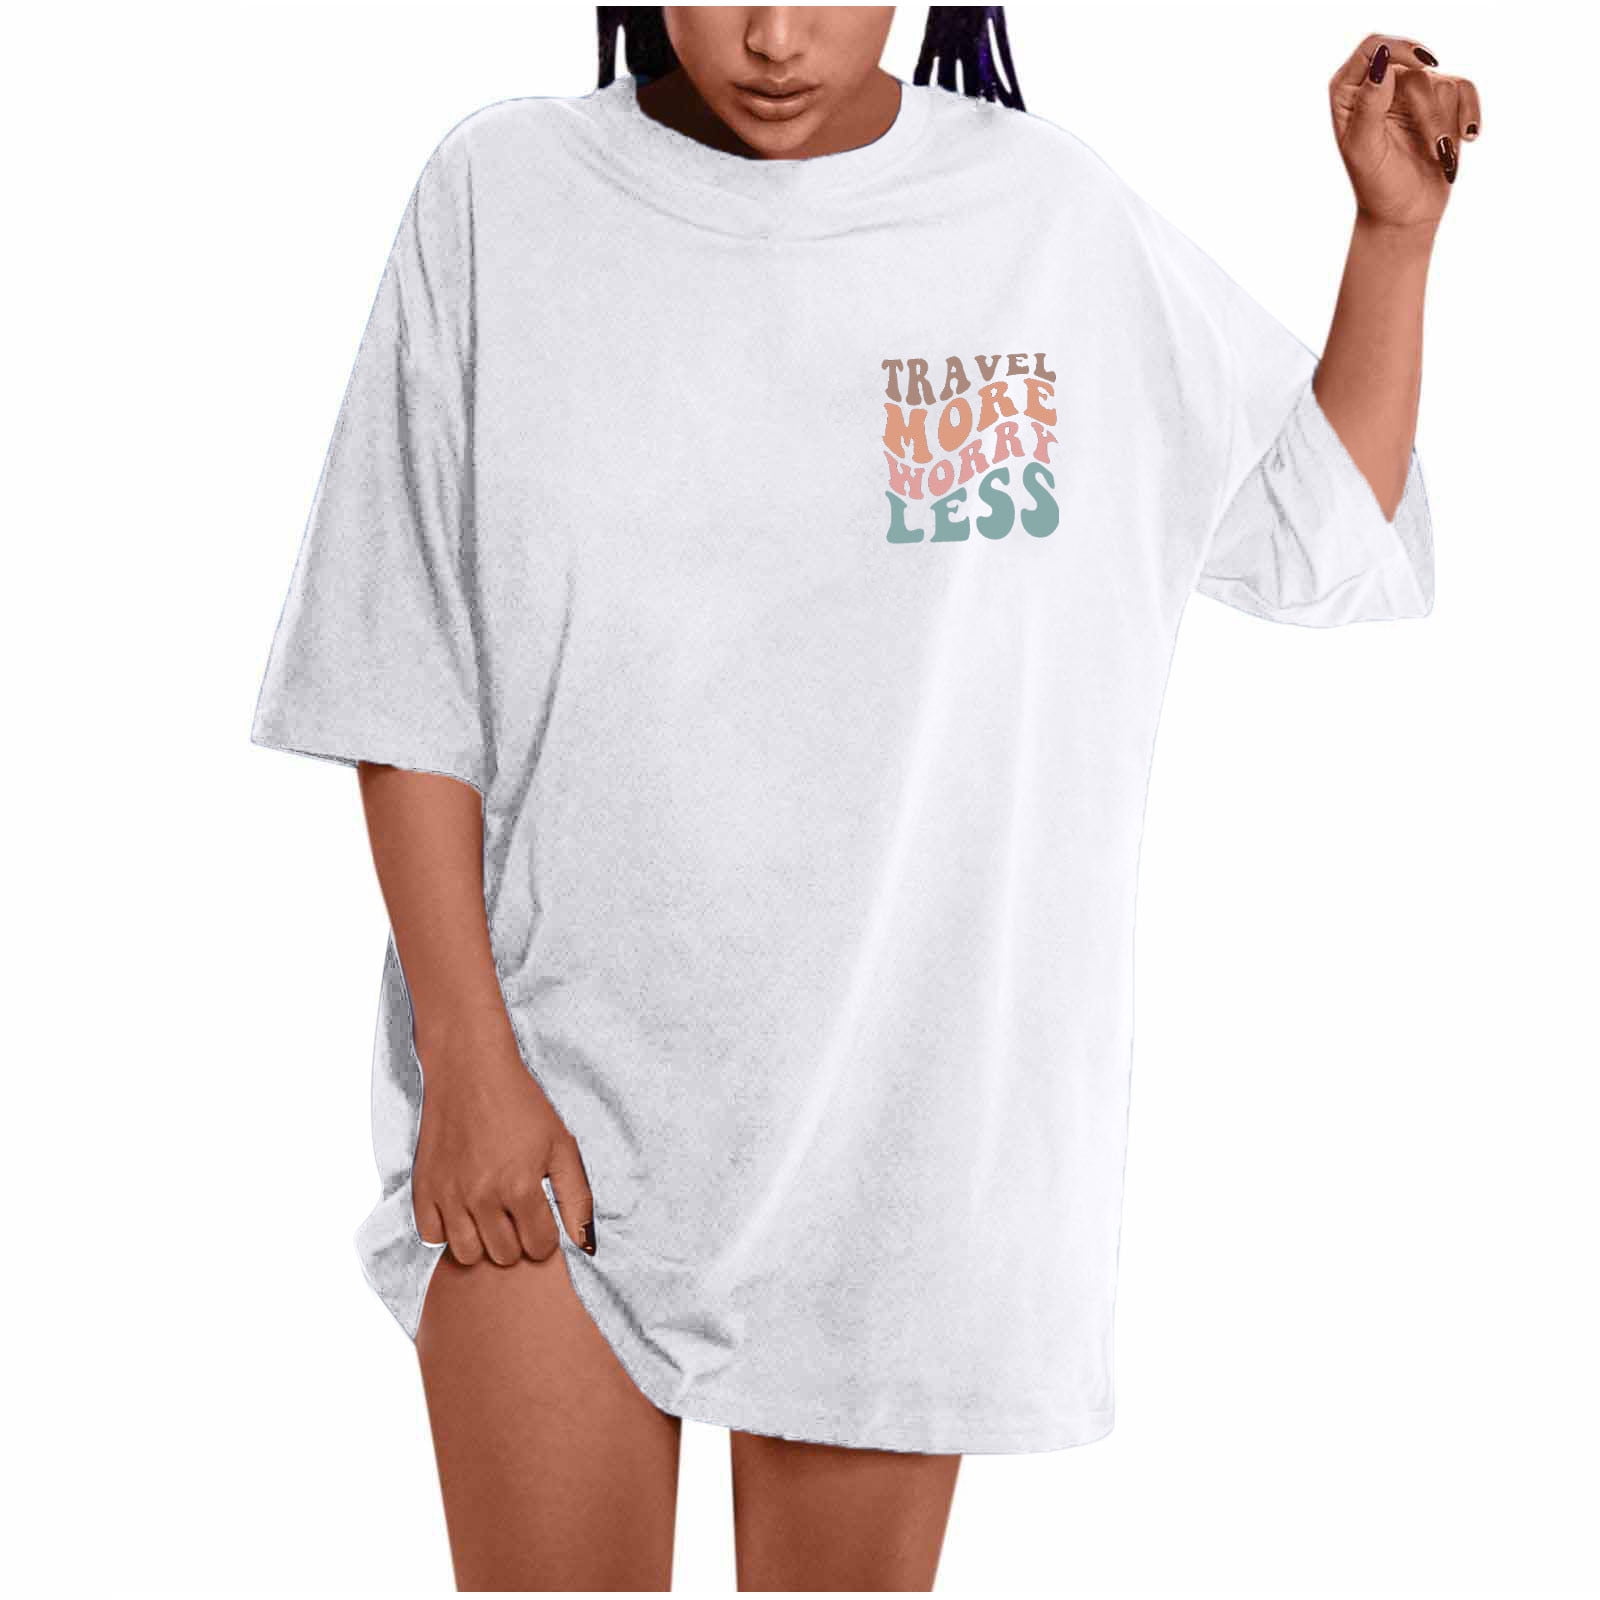 Olyvenn Reduced Slogan Graphic Oversized Shirts for Women TRAVEL MORE  WORRY LESS Womens Plus Size Summer Tops Drop Shoulder Short Sleeve Loose